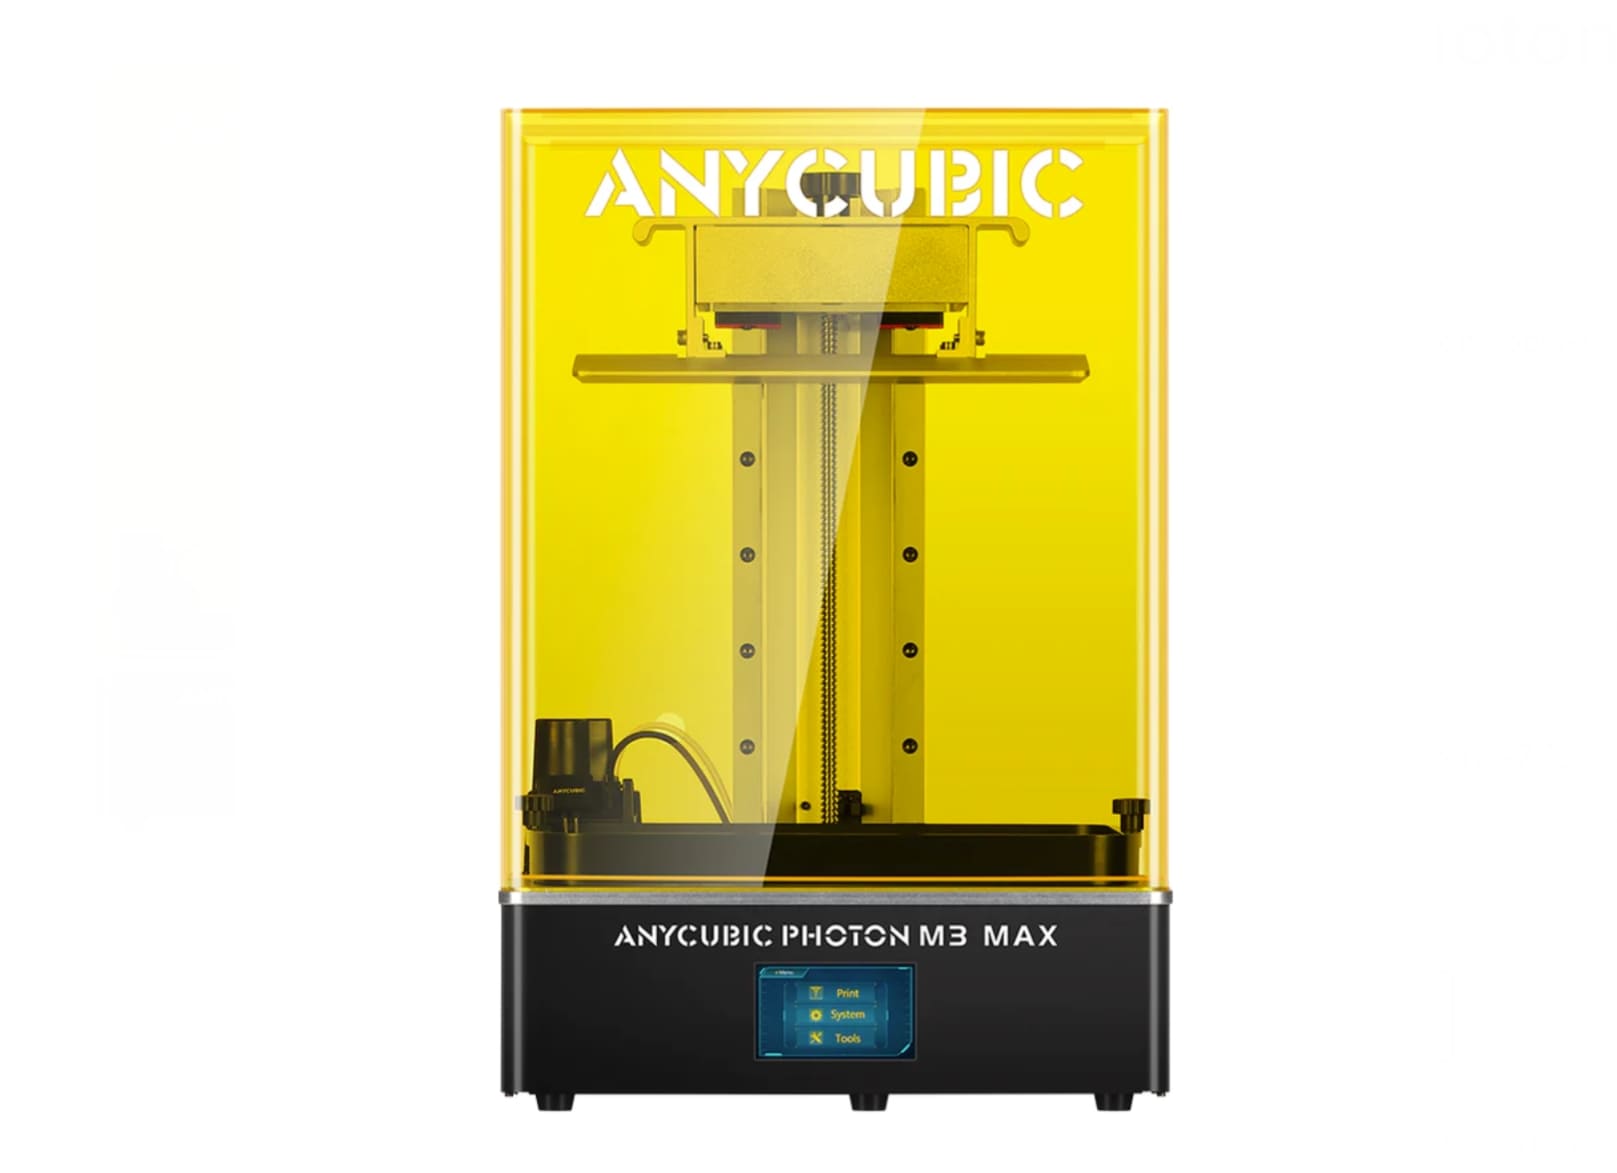 Anycubic Photon M3 Max-Credit from Anycubic